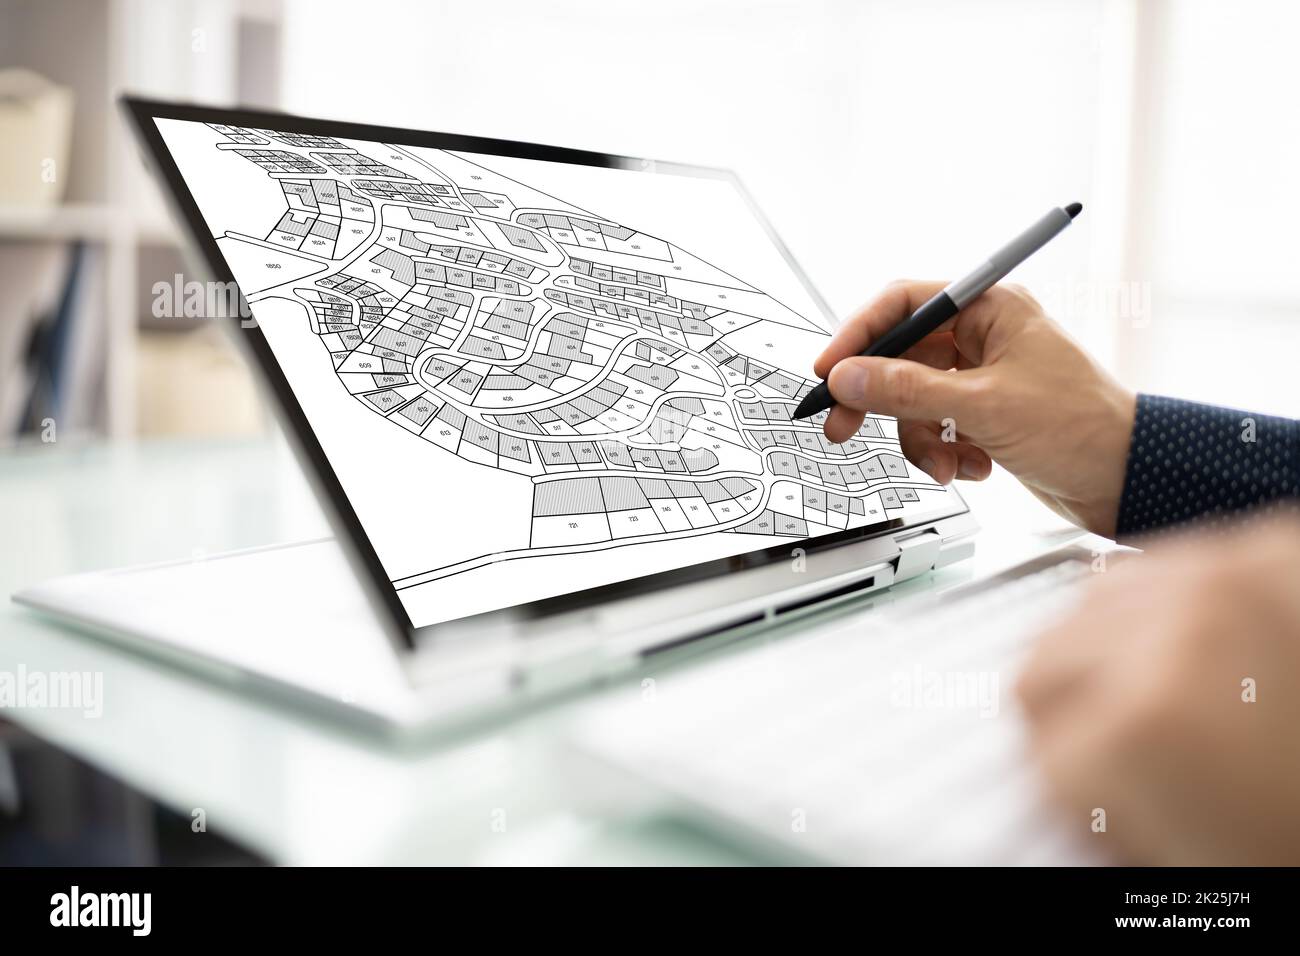 Male Executive Looking At Cadastre Map Stock Photo